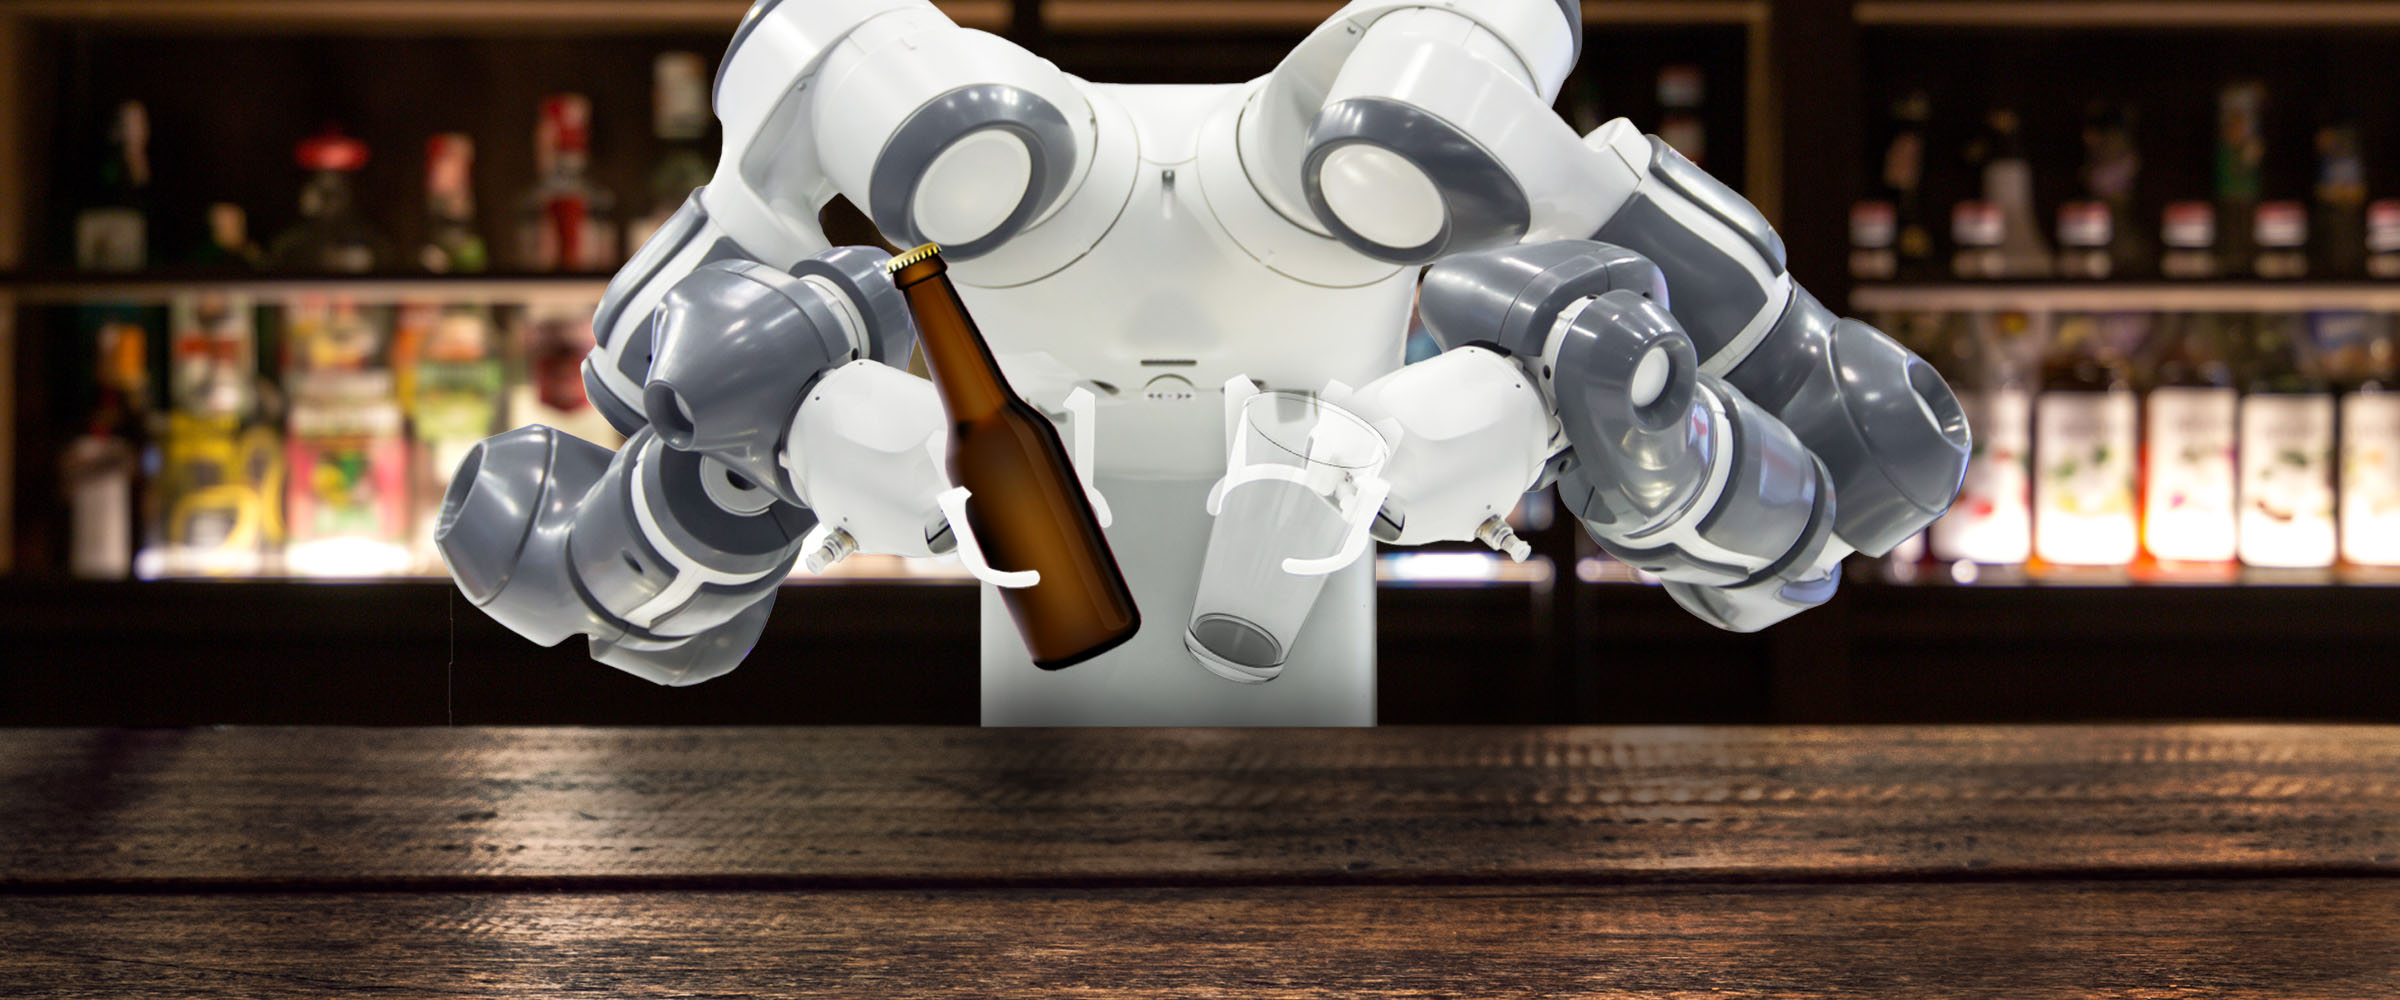 Cheers! Robot Bartender Mixes Drinks, Senses When You Need a